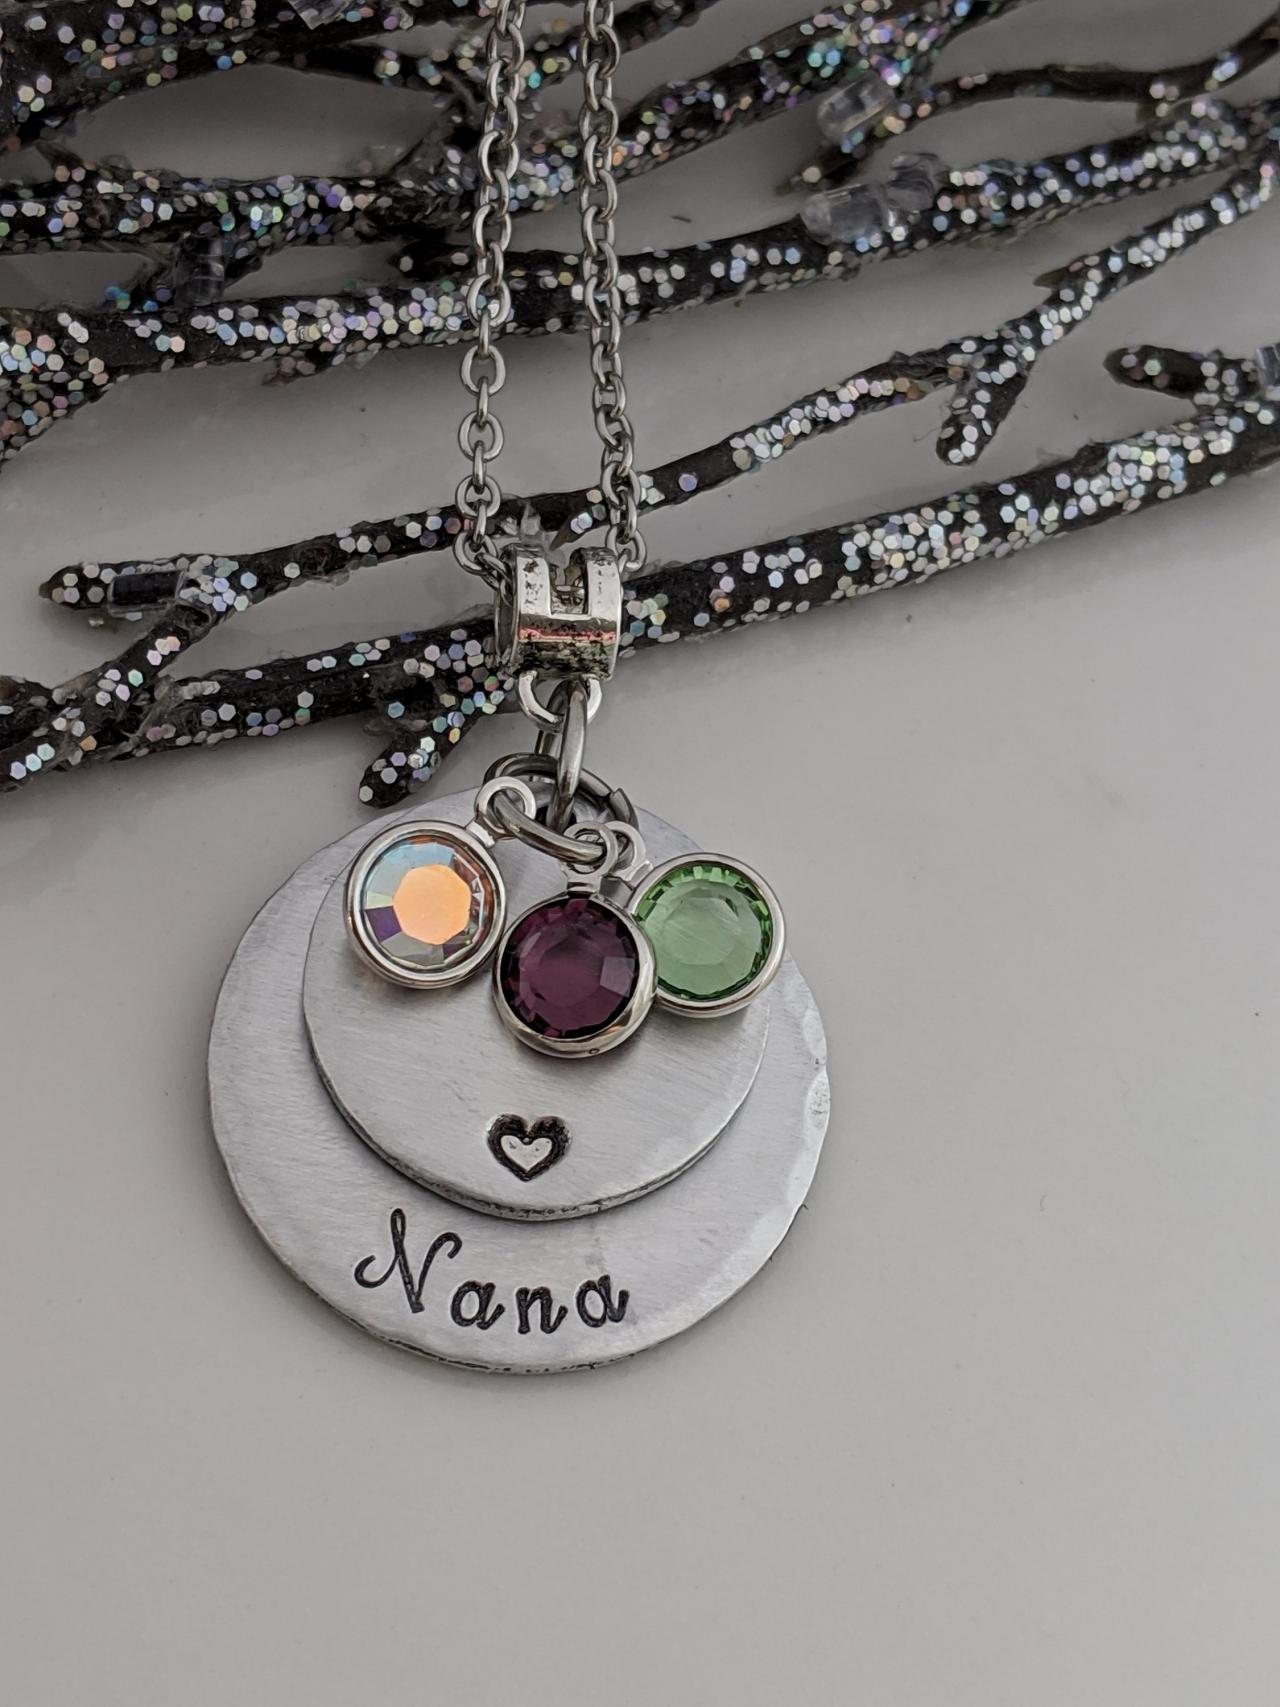 Grandmother Necklace - Birthstone Jewelry - Gift For Nana - Grammy - Mom - Mother's Day - Valentine's Day - Charm Necklace -